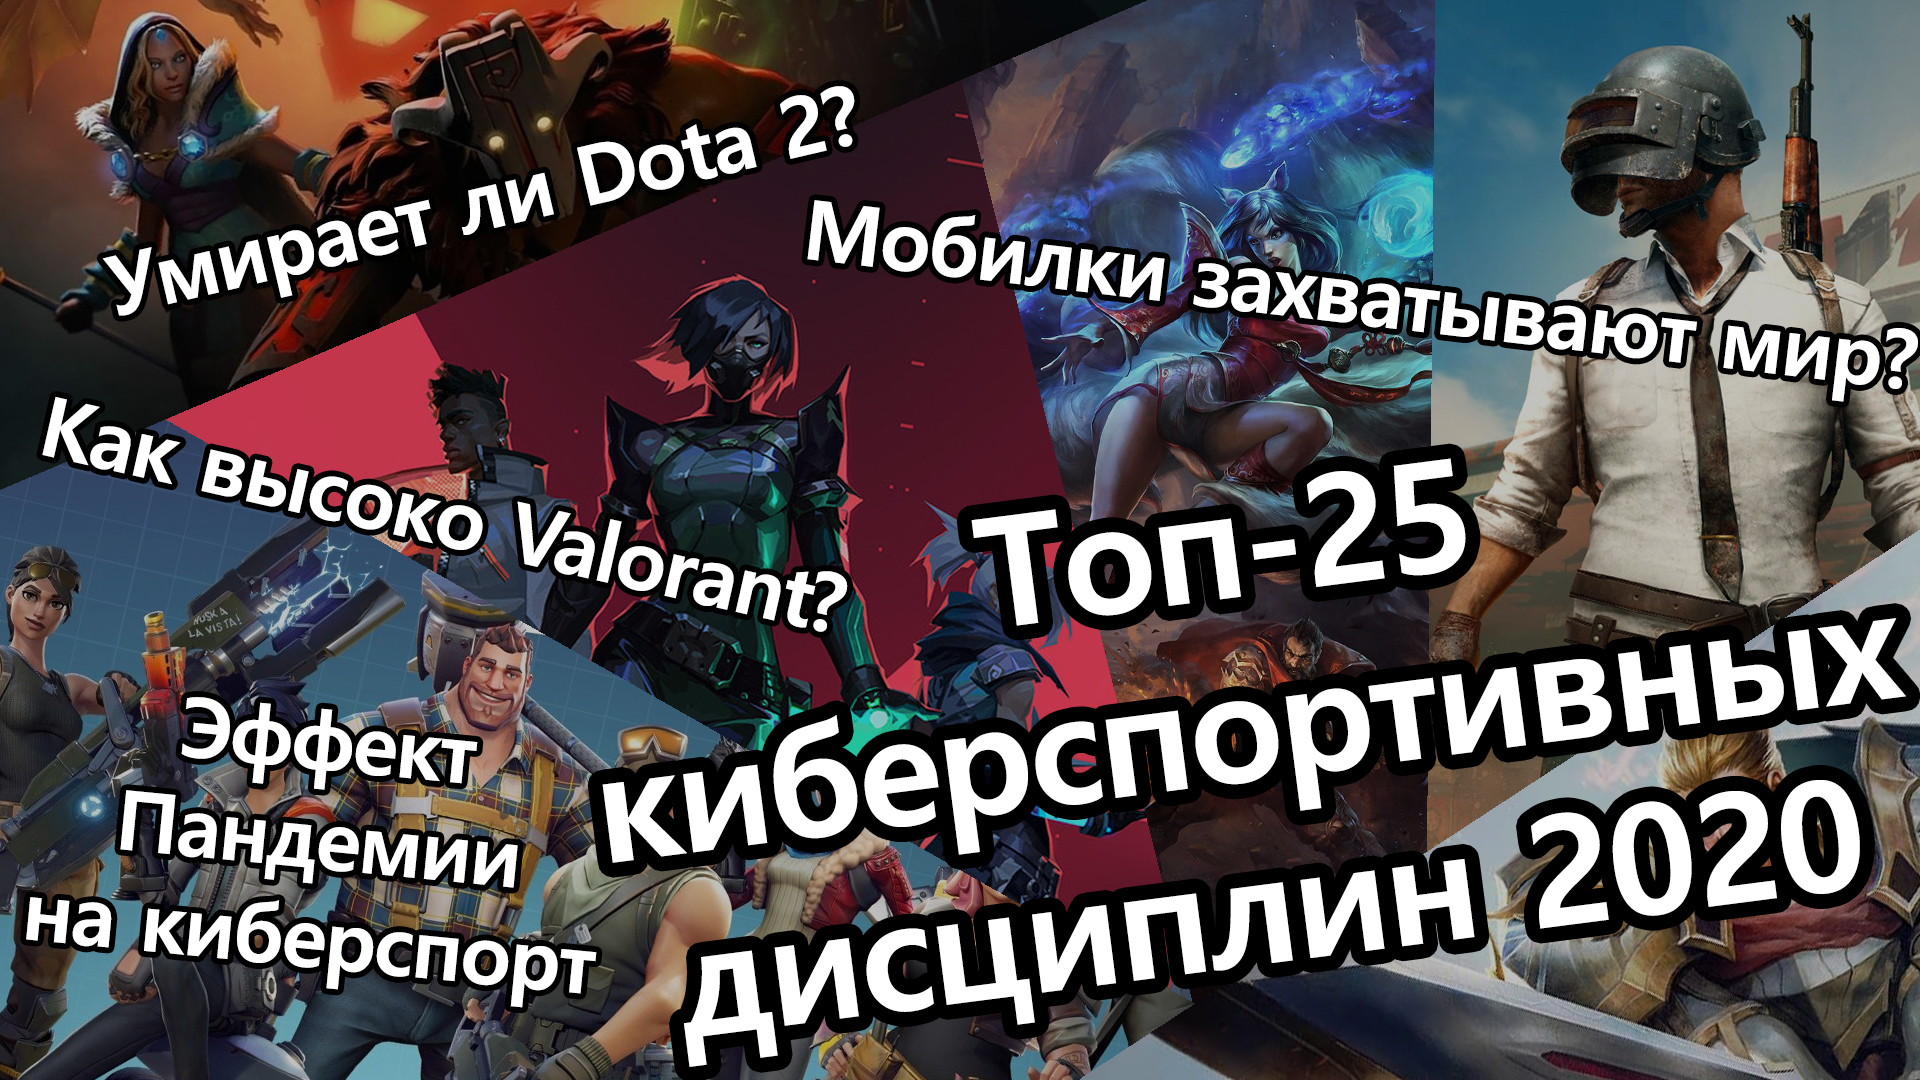 Valorant, Fortnite, Call of Duty: Warzone, PUBG, PUBG Mobile, Counter-Strike: Global Offensive, Arena of Valor, Free Fire, League of Legends, Dota 2